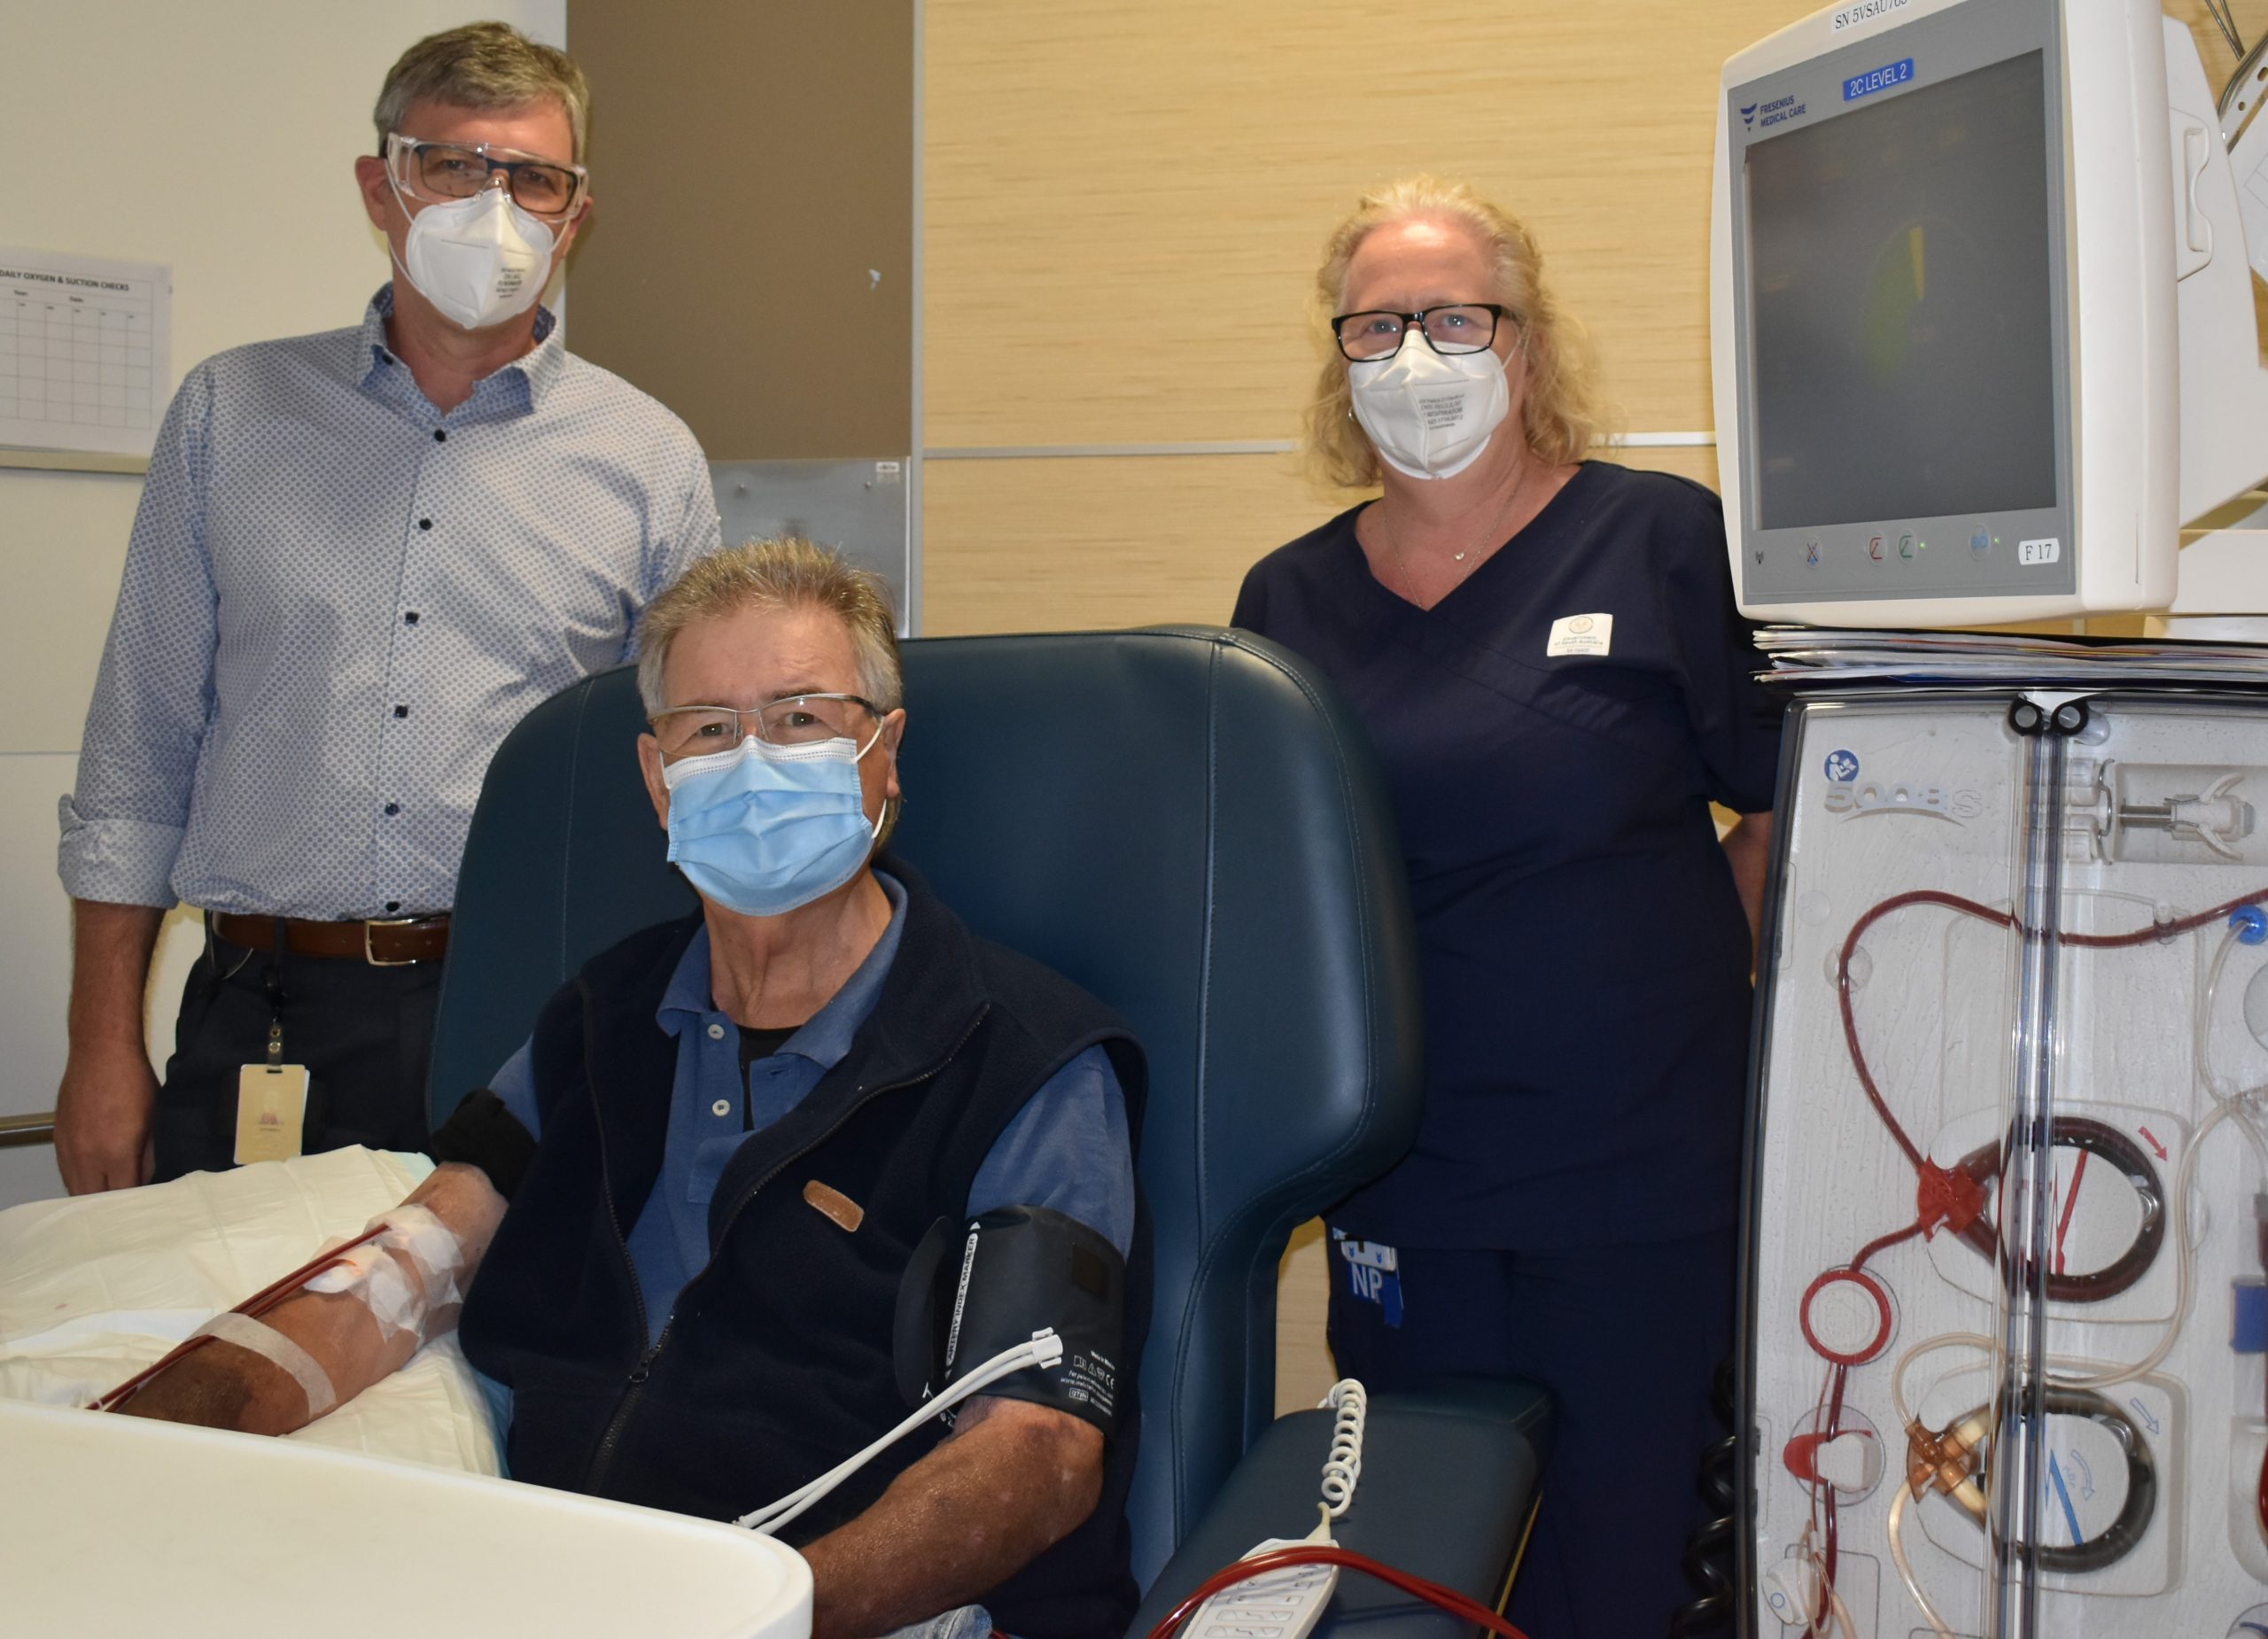 Flexibility and vaccination key to caring for vulnerable dialysis patients during COVID